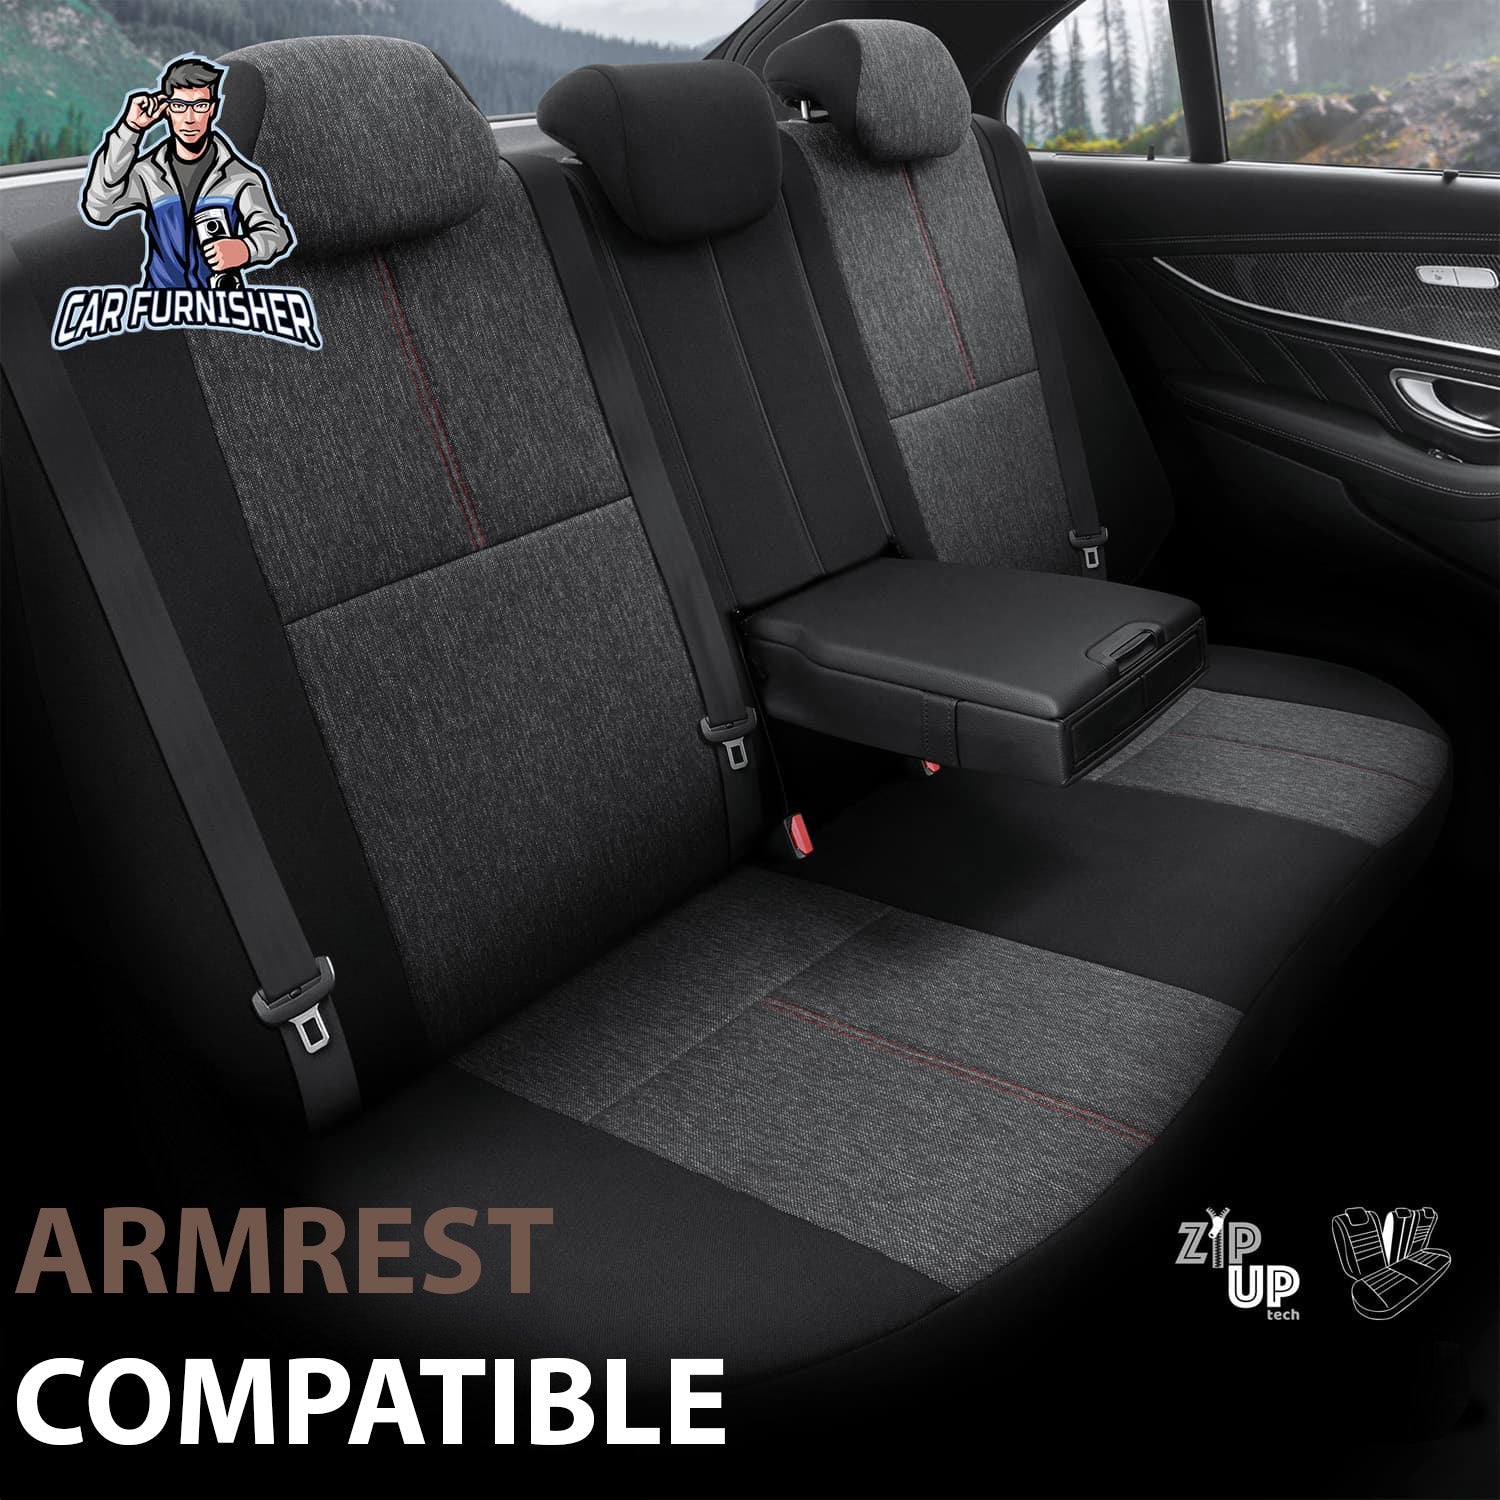 Mercedes 190 Seat Covers Voyager Design Dark Red 5 Seats + Headrests (Full Set) Leather & Linen Fabric